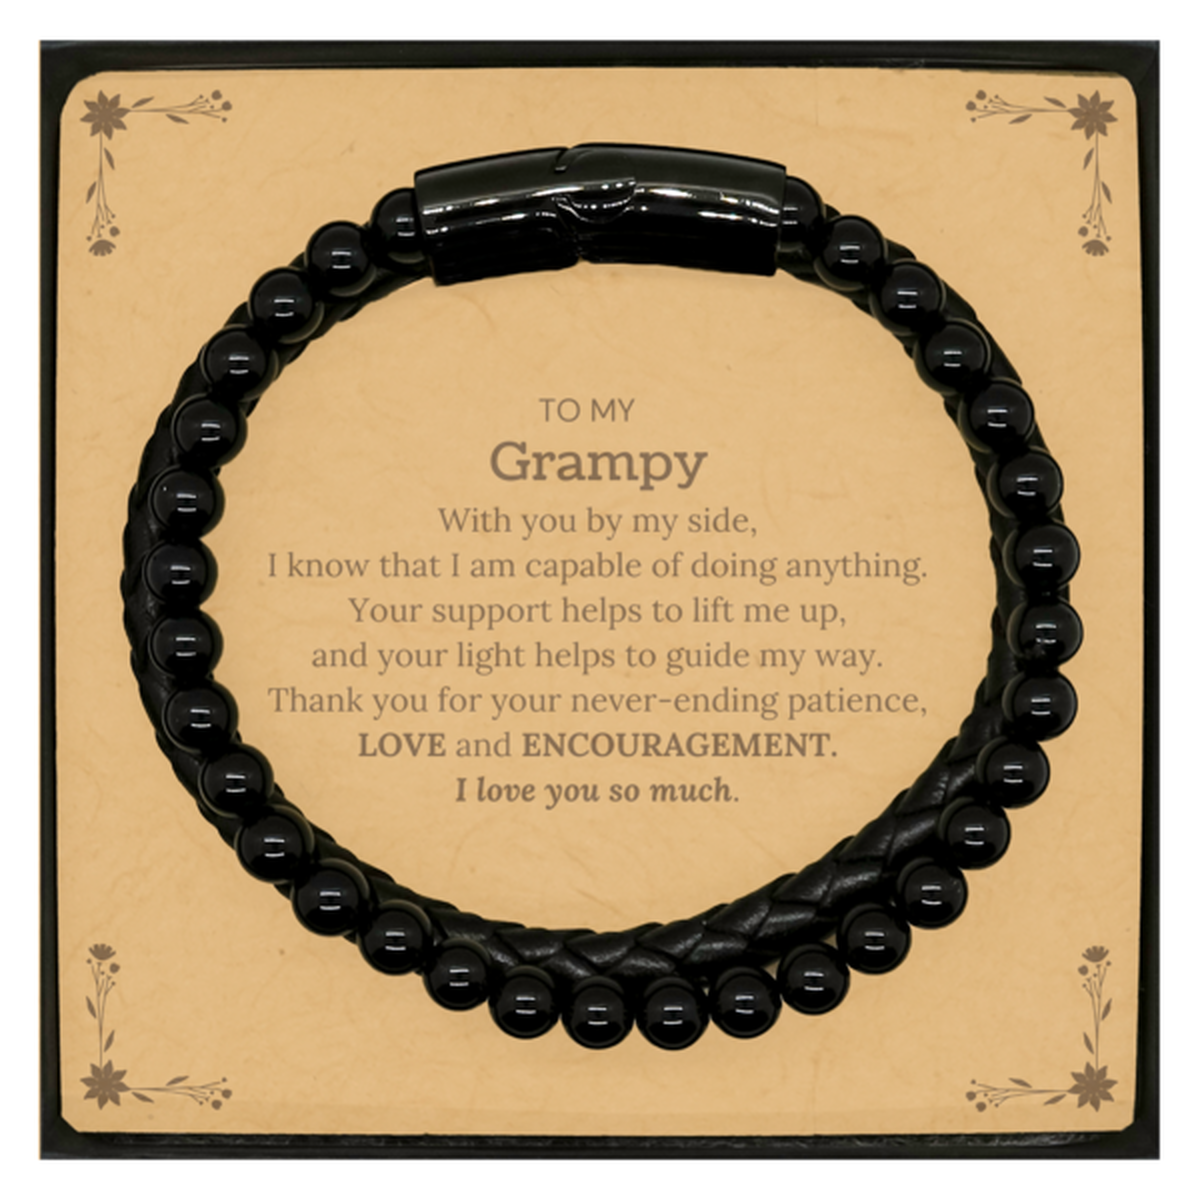 Appreciation Grampy Stone Leather Bracelets Gifts, To My Grampy Birthday Christmas Wedding Keepsake Gifts for Grampy With you by my side, I know that I am capable of doing anything. I love you so much